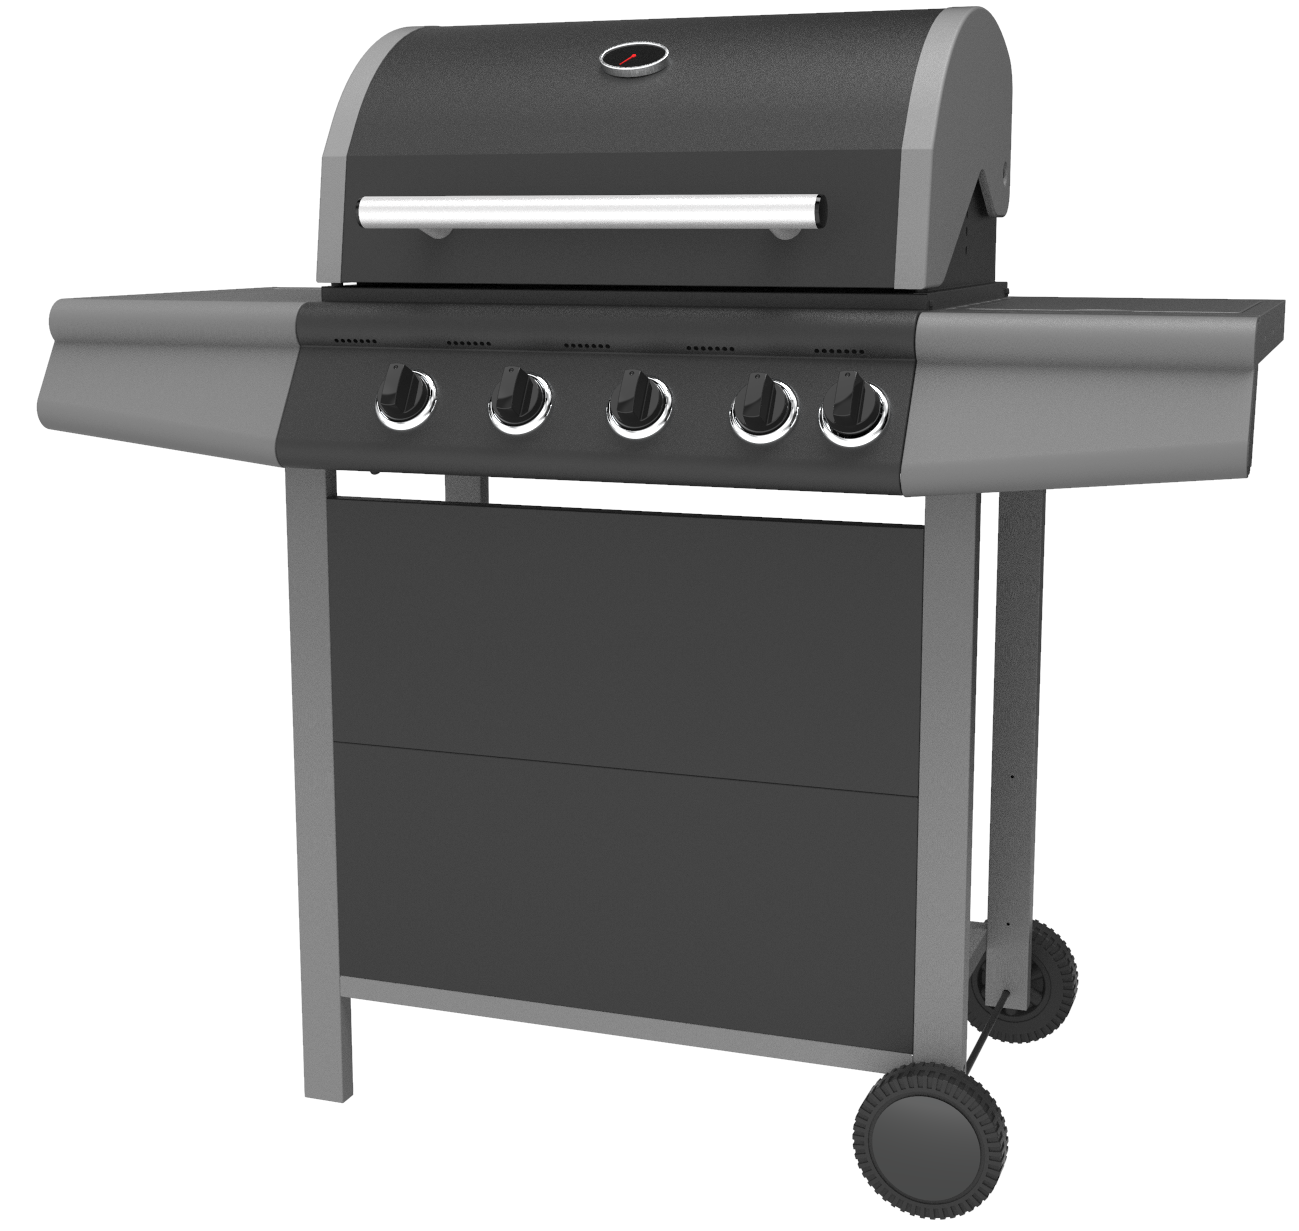 Four Burner Gas Barbecue Grill with side burner